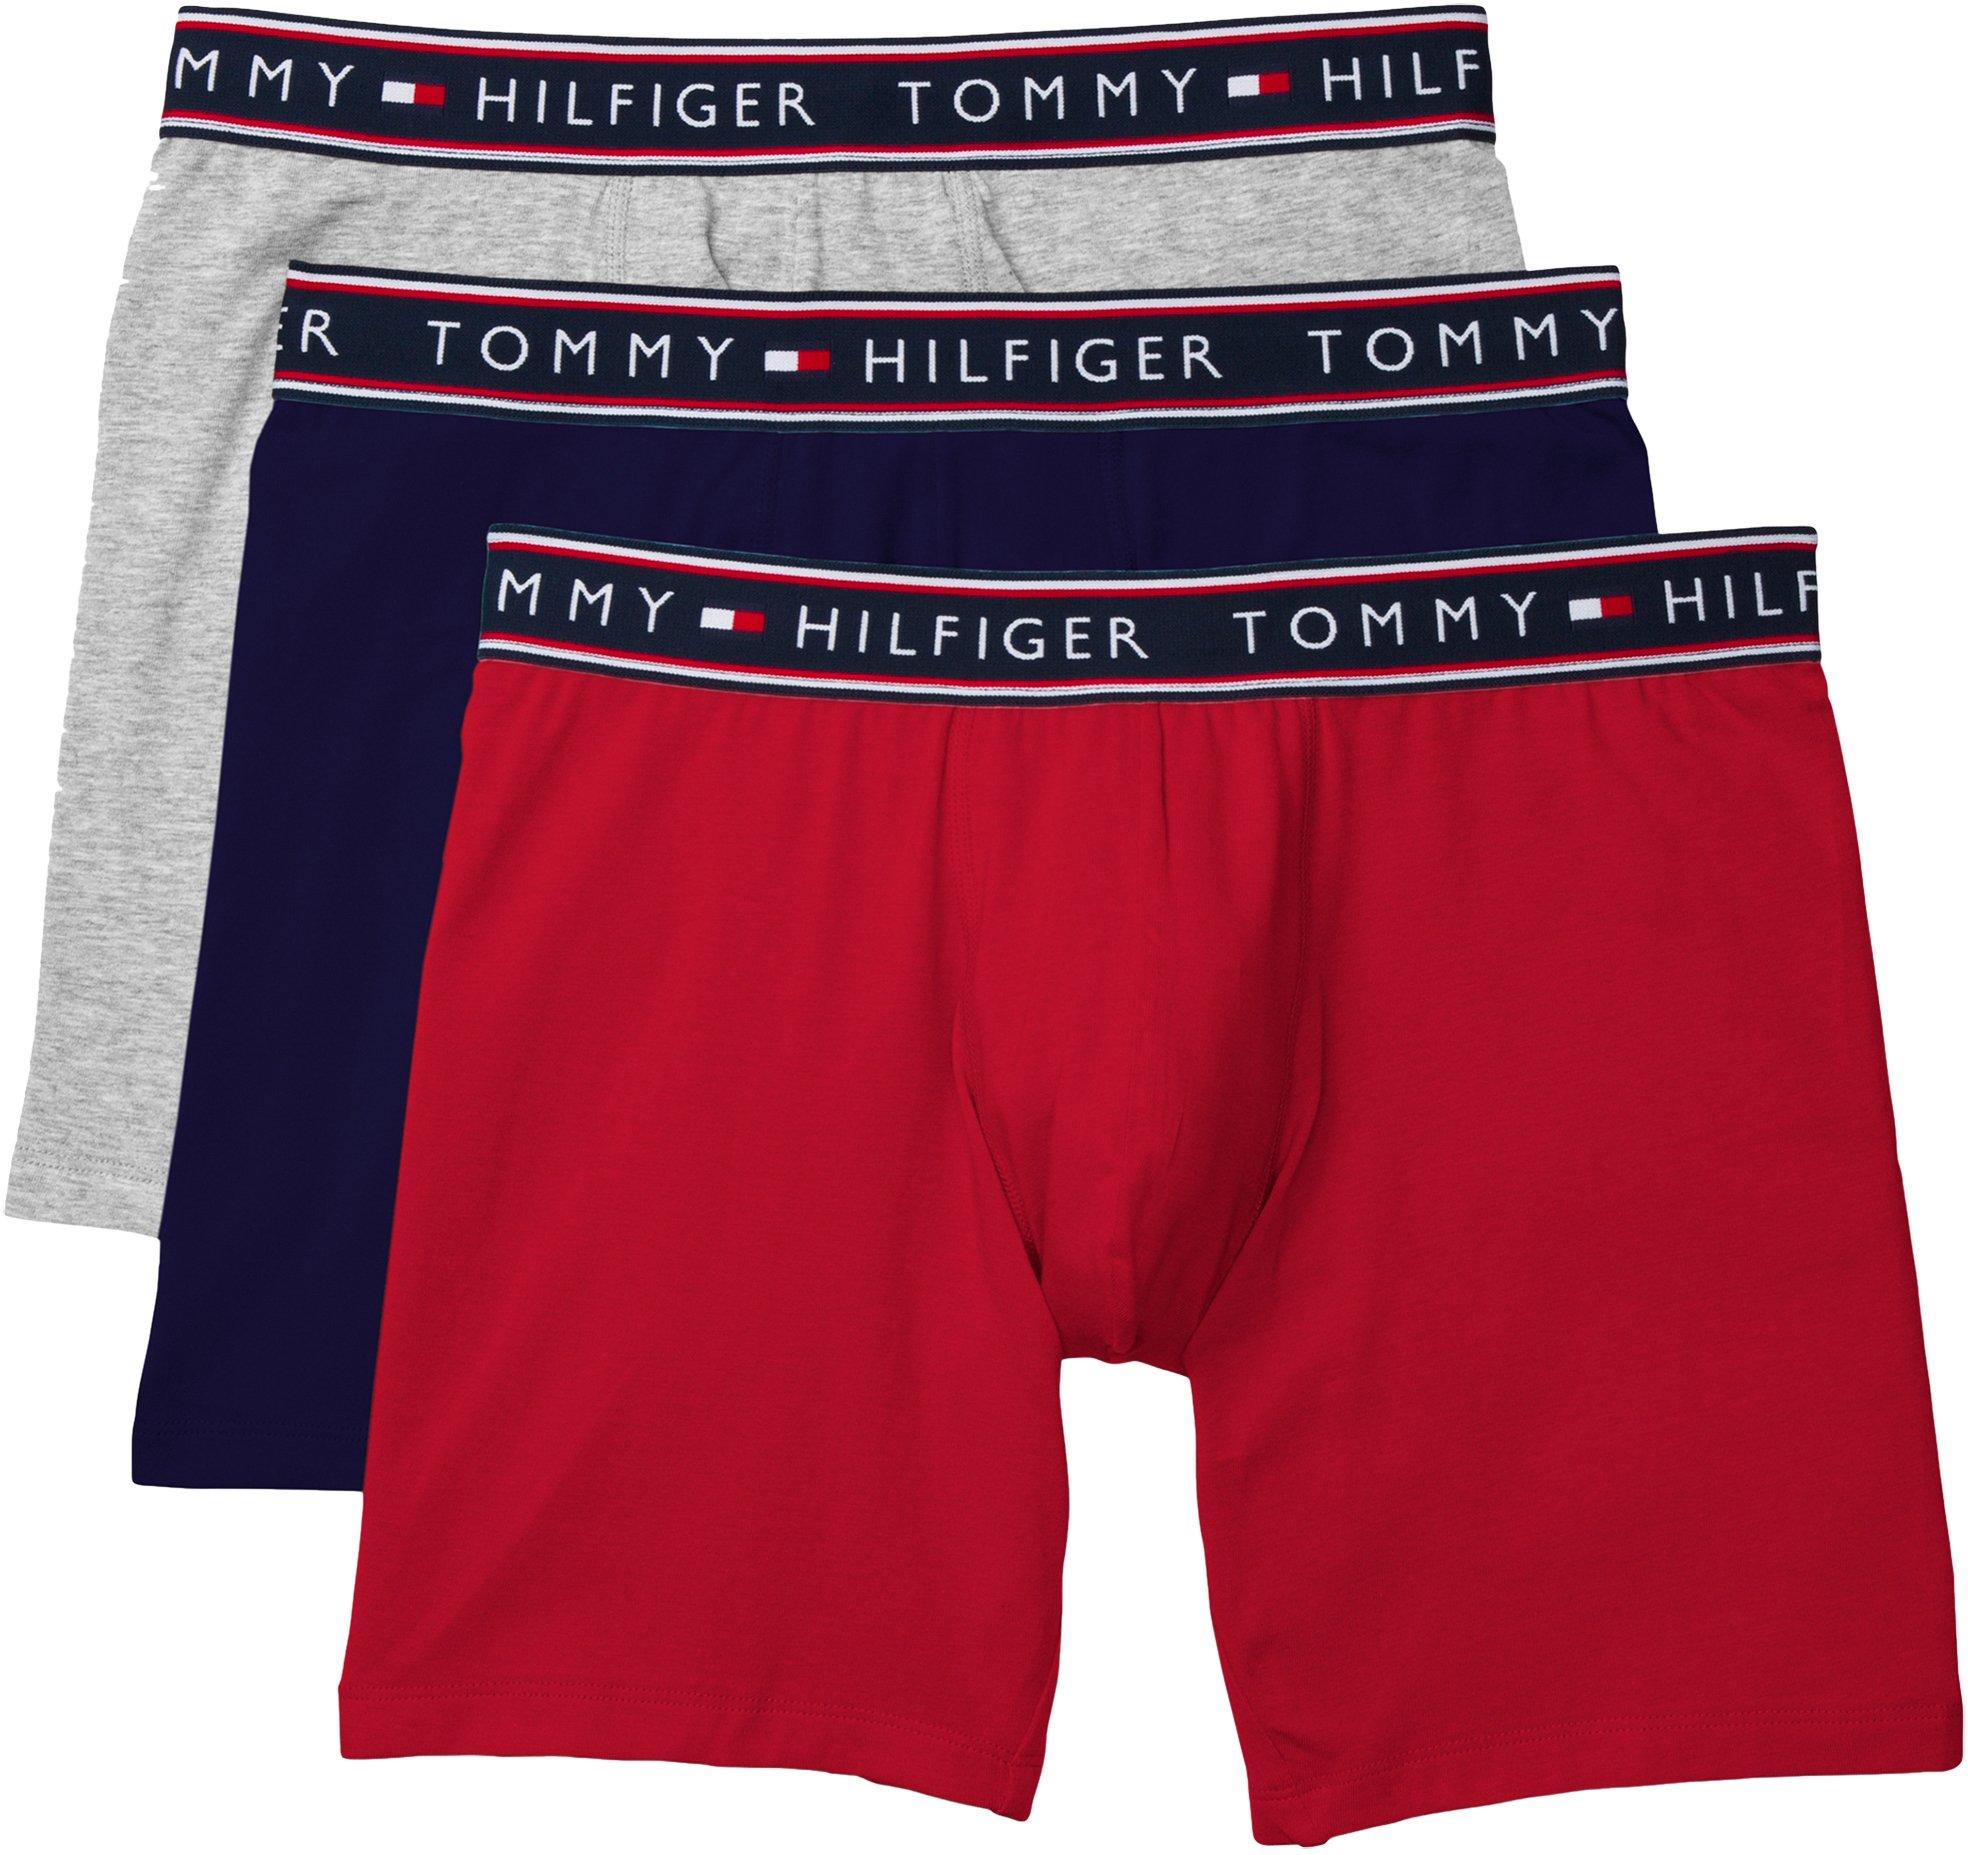 tommy hilfiger boxers near me